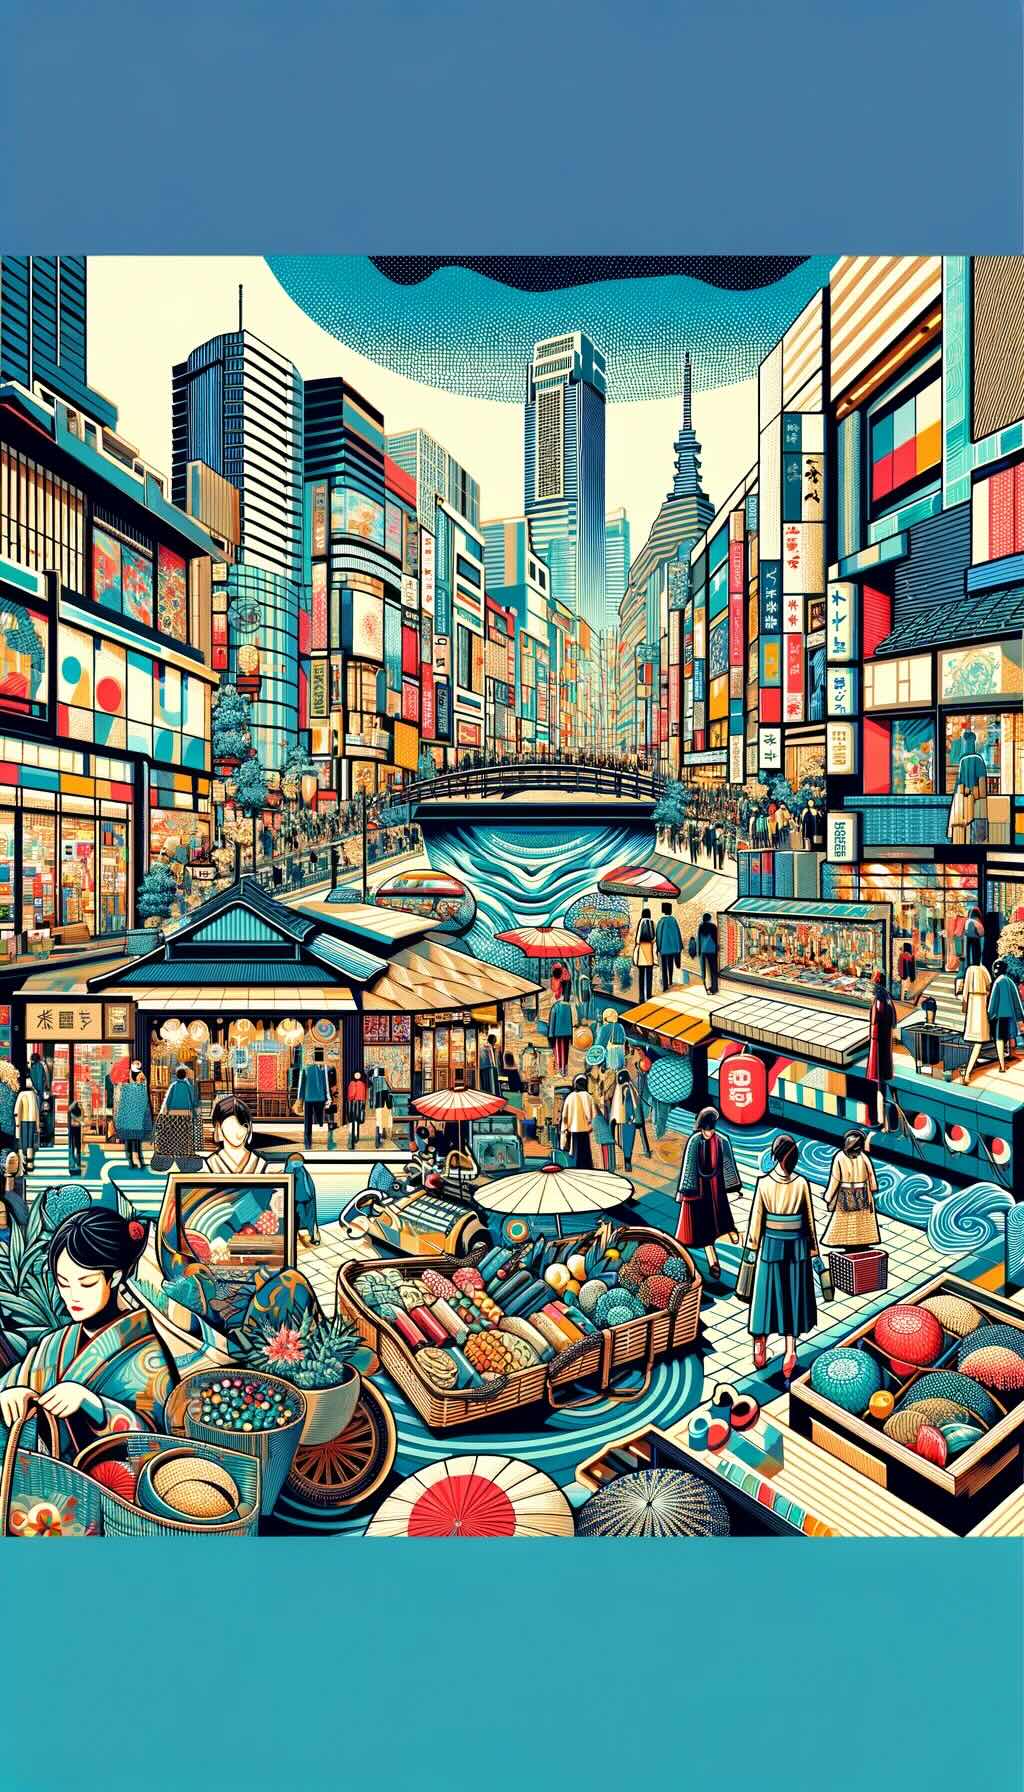 Mosaic of shopping experiences in Japan, from the upscale districts of Ginza and Shibuya to local markets and traditional workshops depicts the eclectic and diverse nature of shopping in Japan, showcasing the contrast and harmony between modernity and tradition